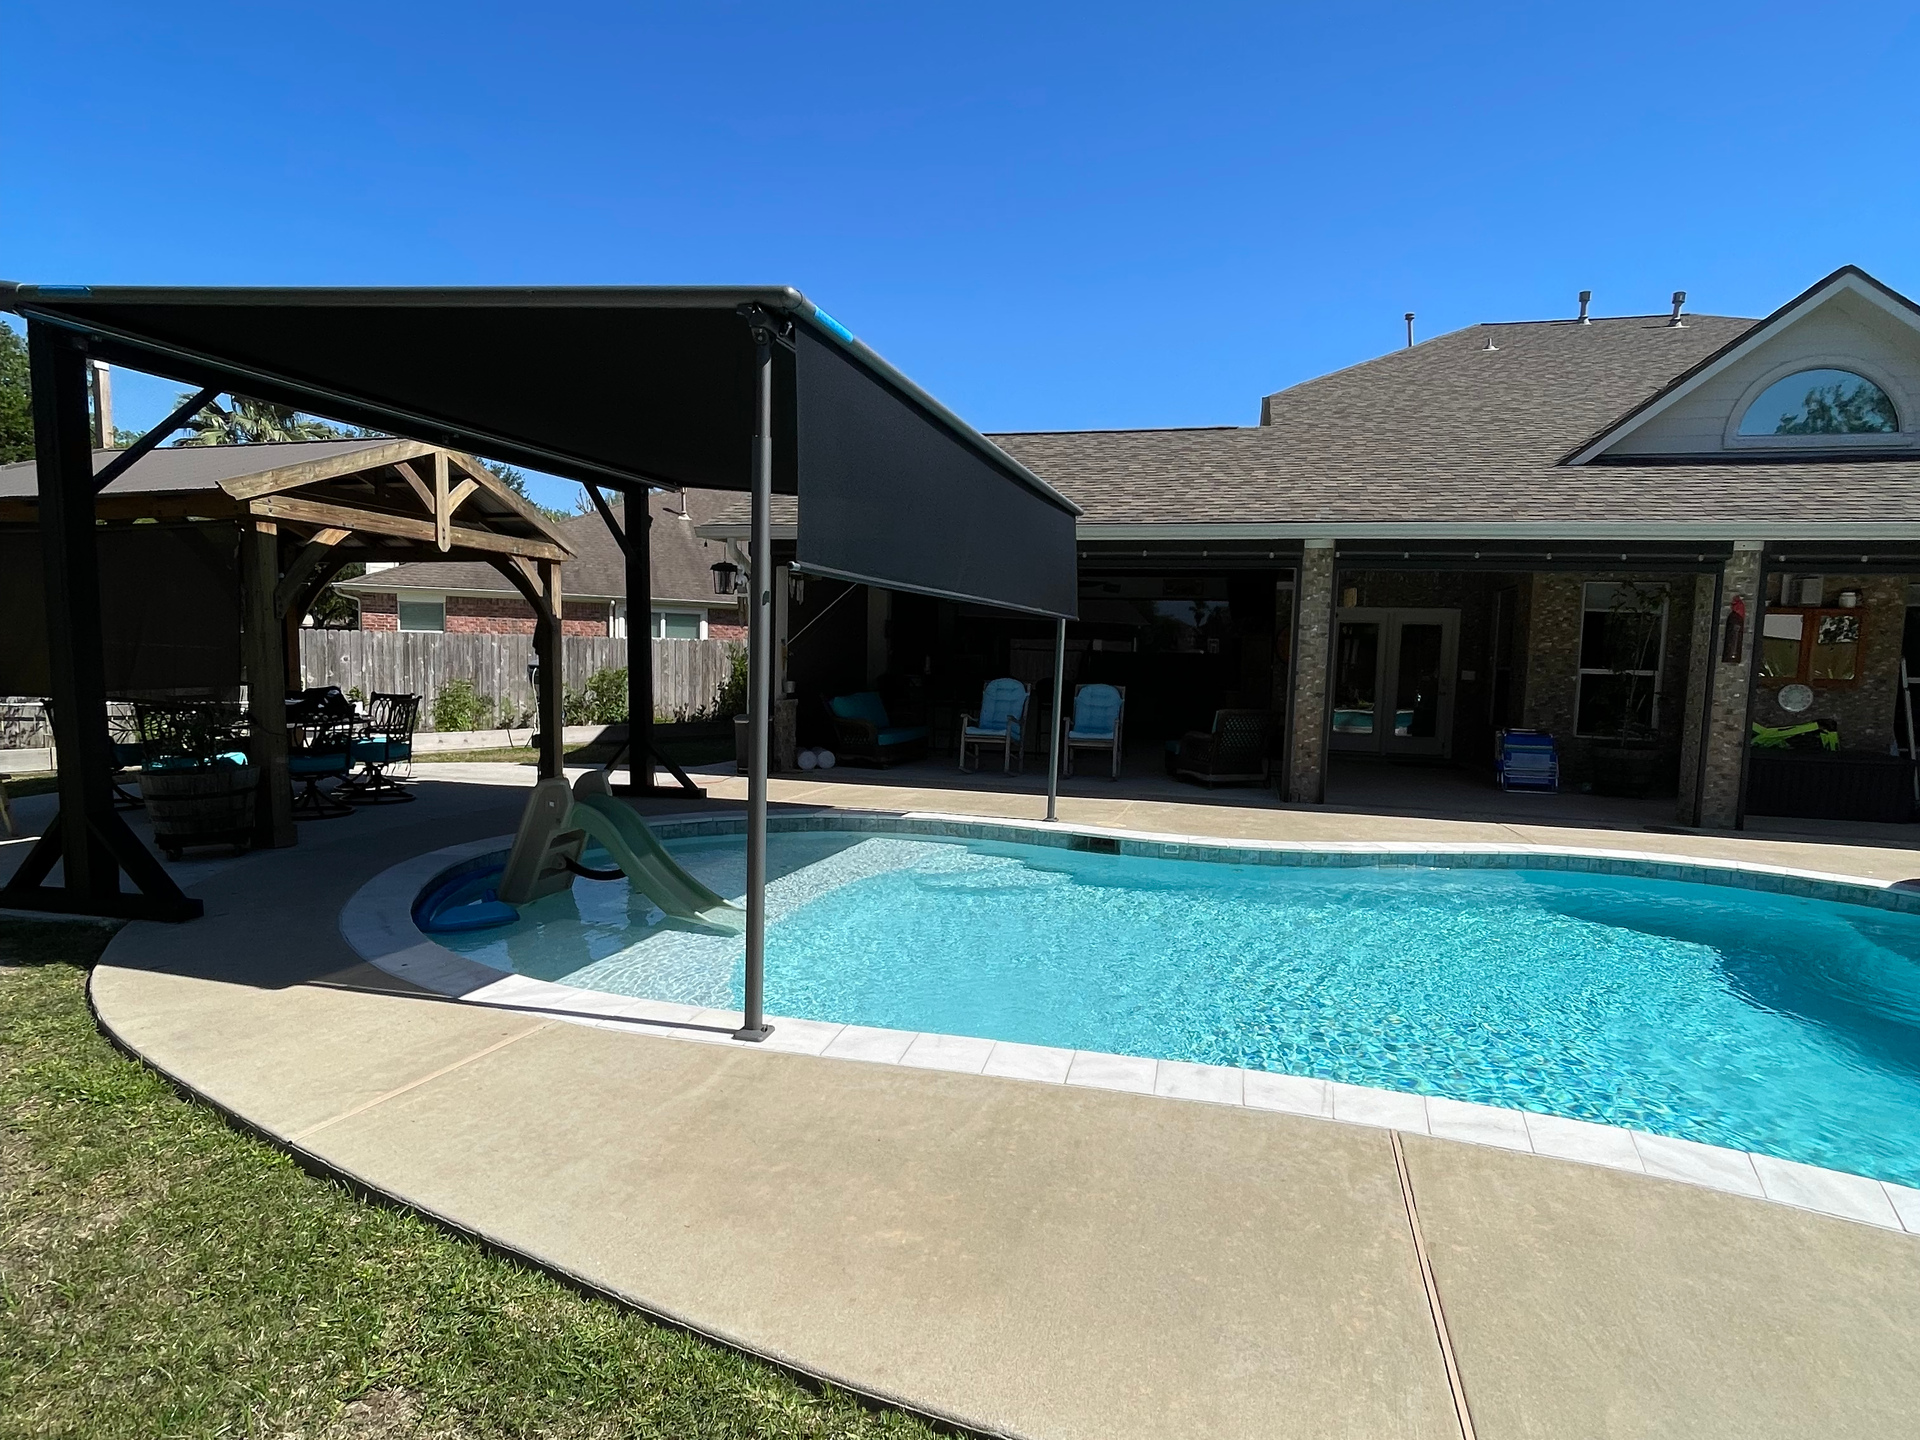 There is a large swimming pool in the backyard of a house with a motorized pergola